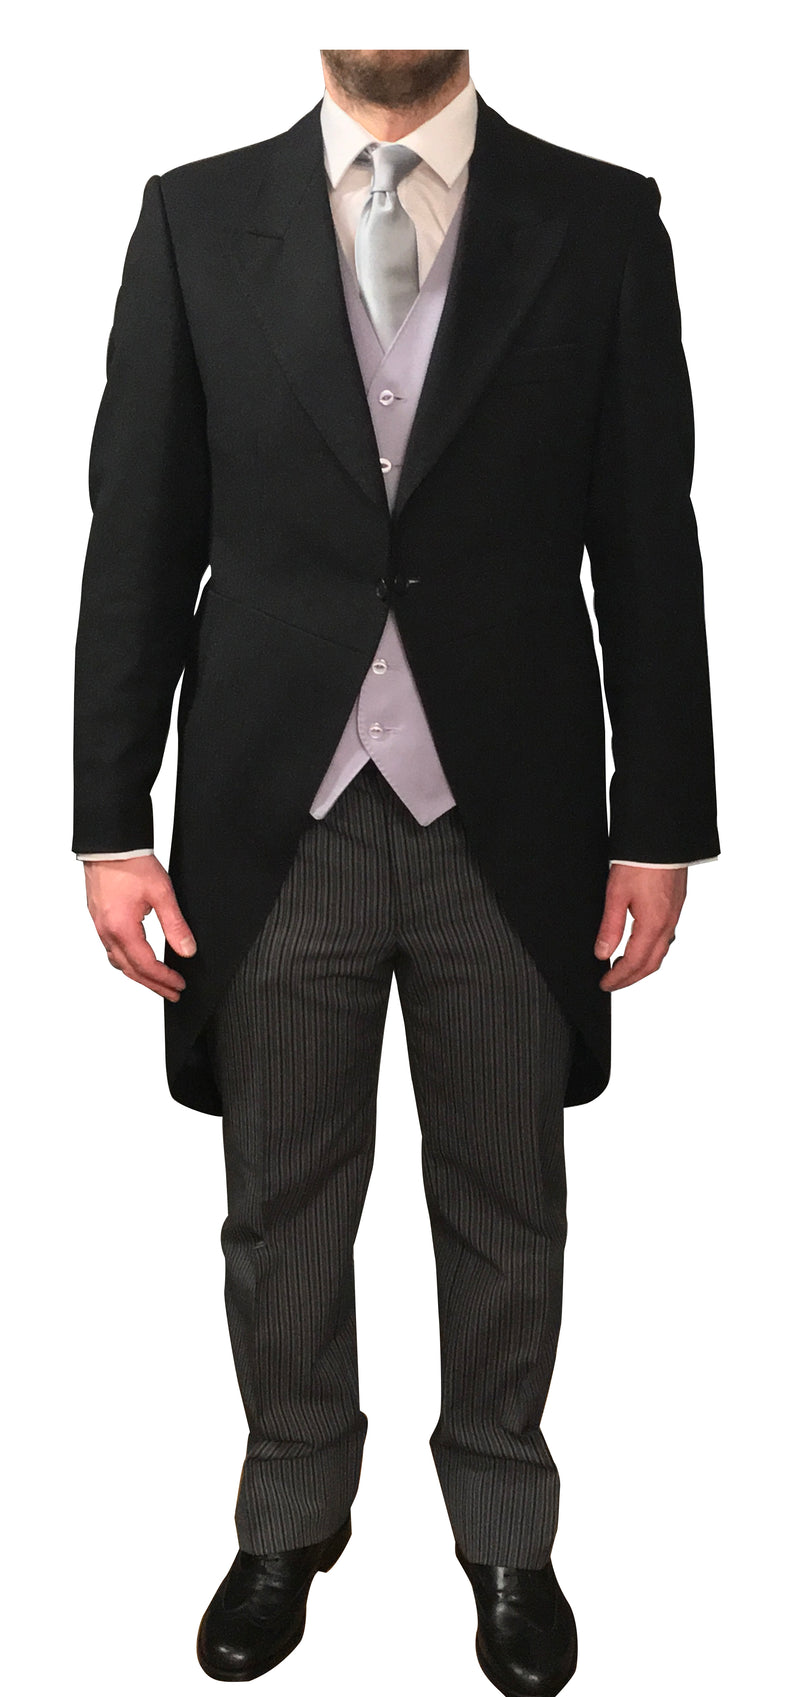 Black tailcoat from Magee - Pure new wool - ex-hire